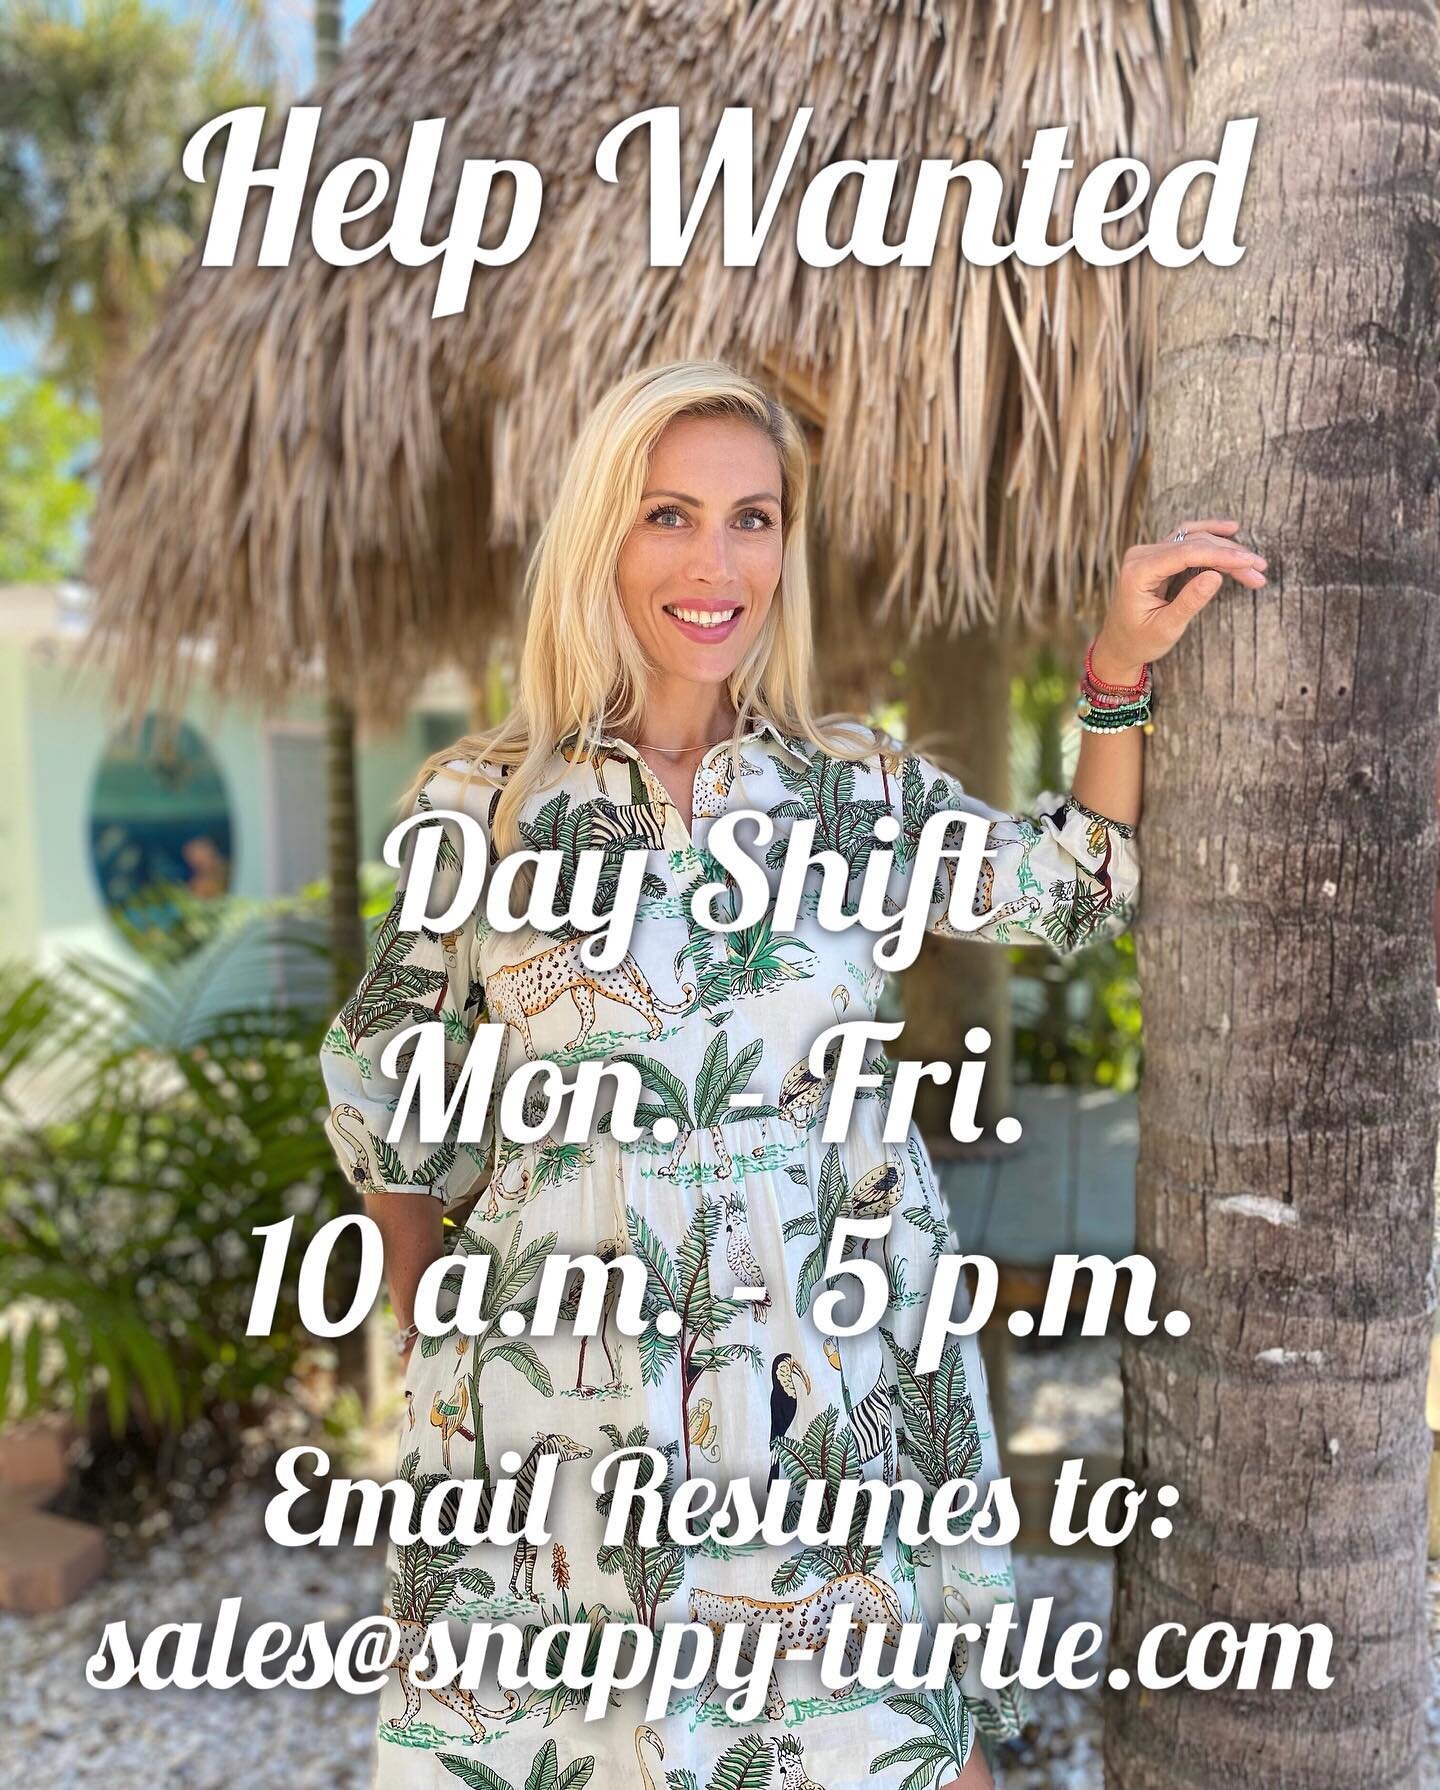 Love Shack is Hiring! ☀️🙌🏻🏝👗👙 Part-time &amp; Full-time...send resumes to sales@snappy-turtle.com #loveshackdelray #delraybeach #hiring #parttime #fulltime #dayshift